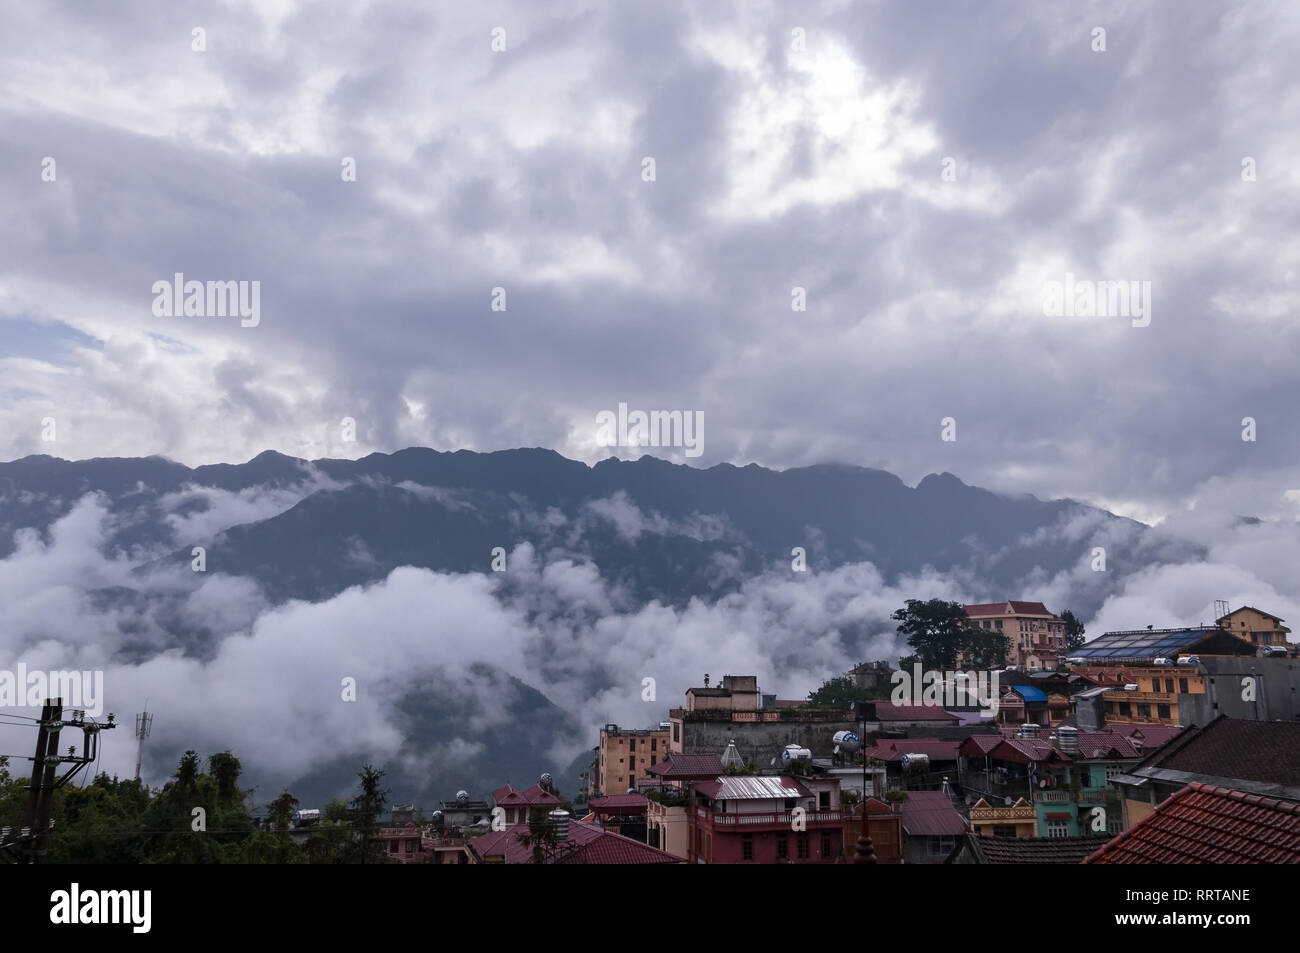 Sa Pa town with Fansipan mountains in background covered in clouds on an overcast afternoon, Vietnam Stock Photo